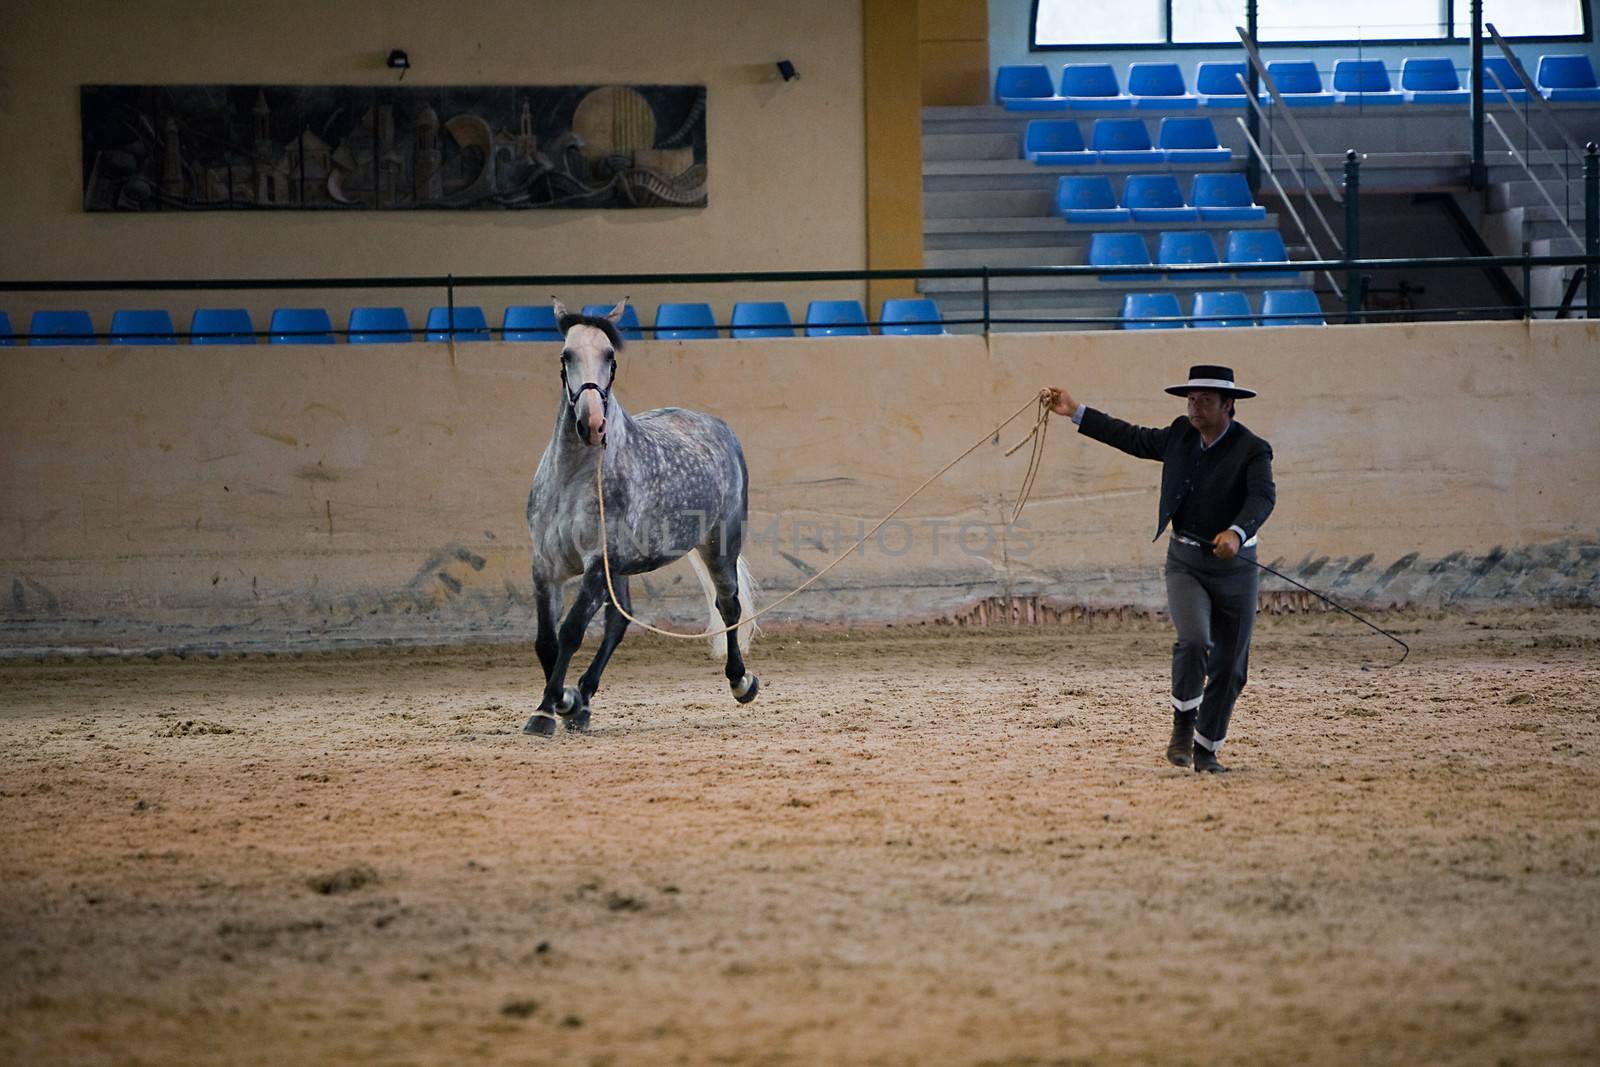 Functionality testing of horses of purebred Spanish, Spain by digicomphoto